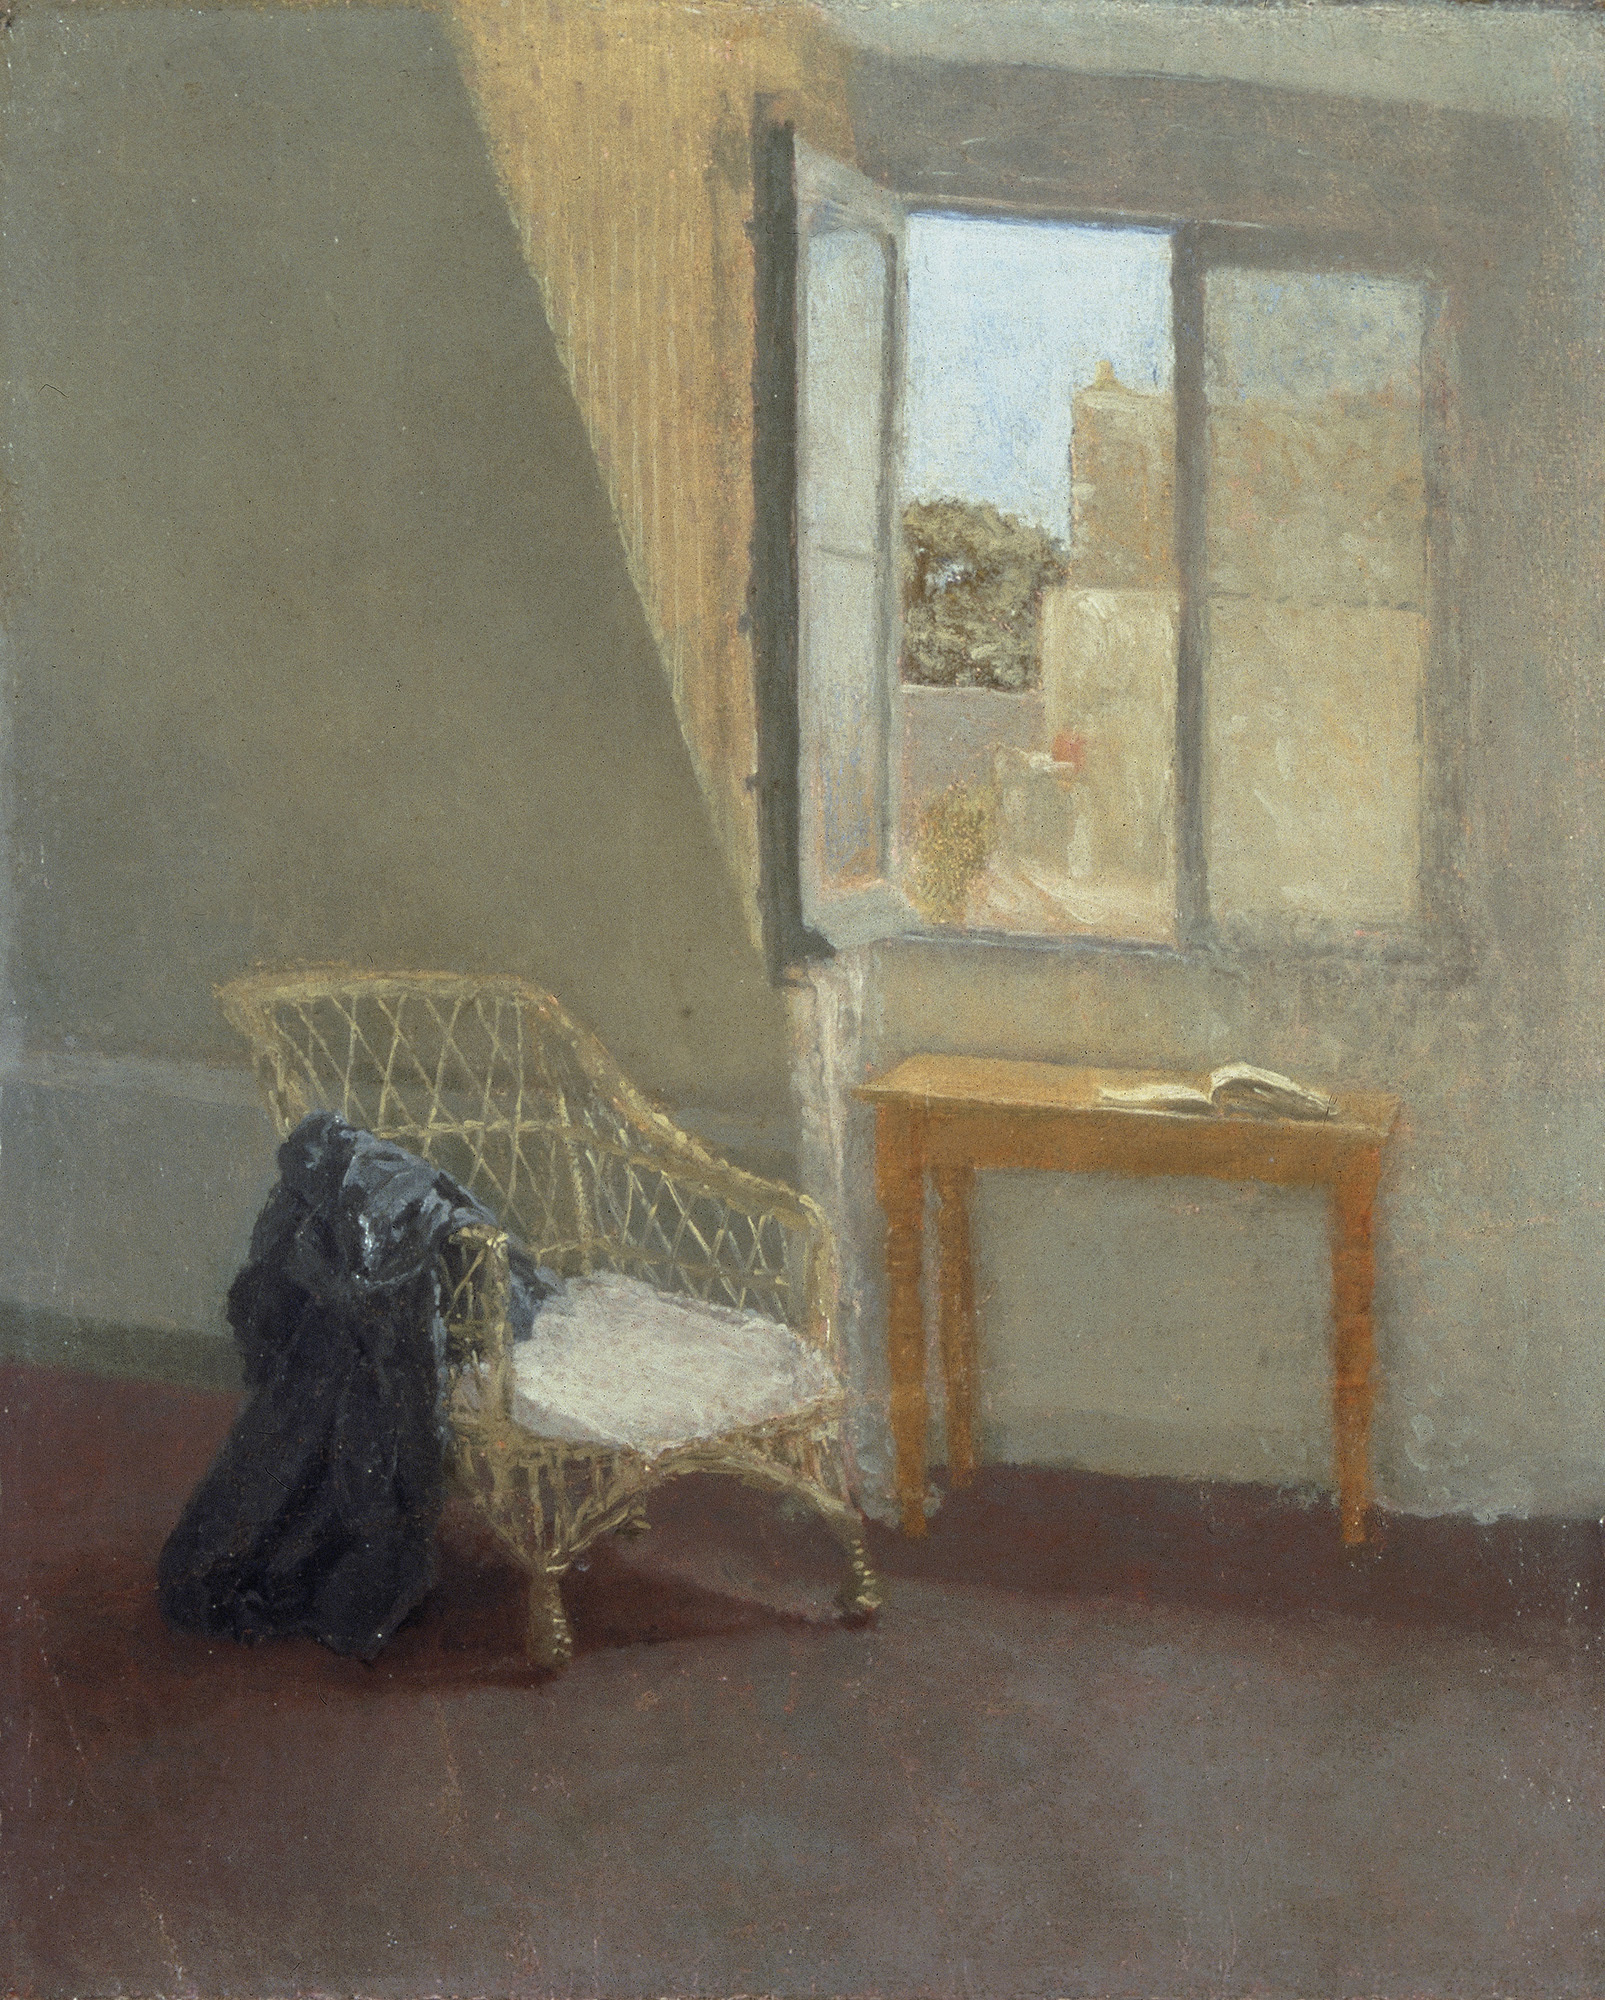 A Corner of the Artist’s Room in Paris, 1907-1909 (oil on canvas) by Gwen John (1876-1939). National Museum Wales, National Museum Cardiff. Photo credit Amgueddfa Cymru – National Museum Wales 